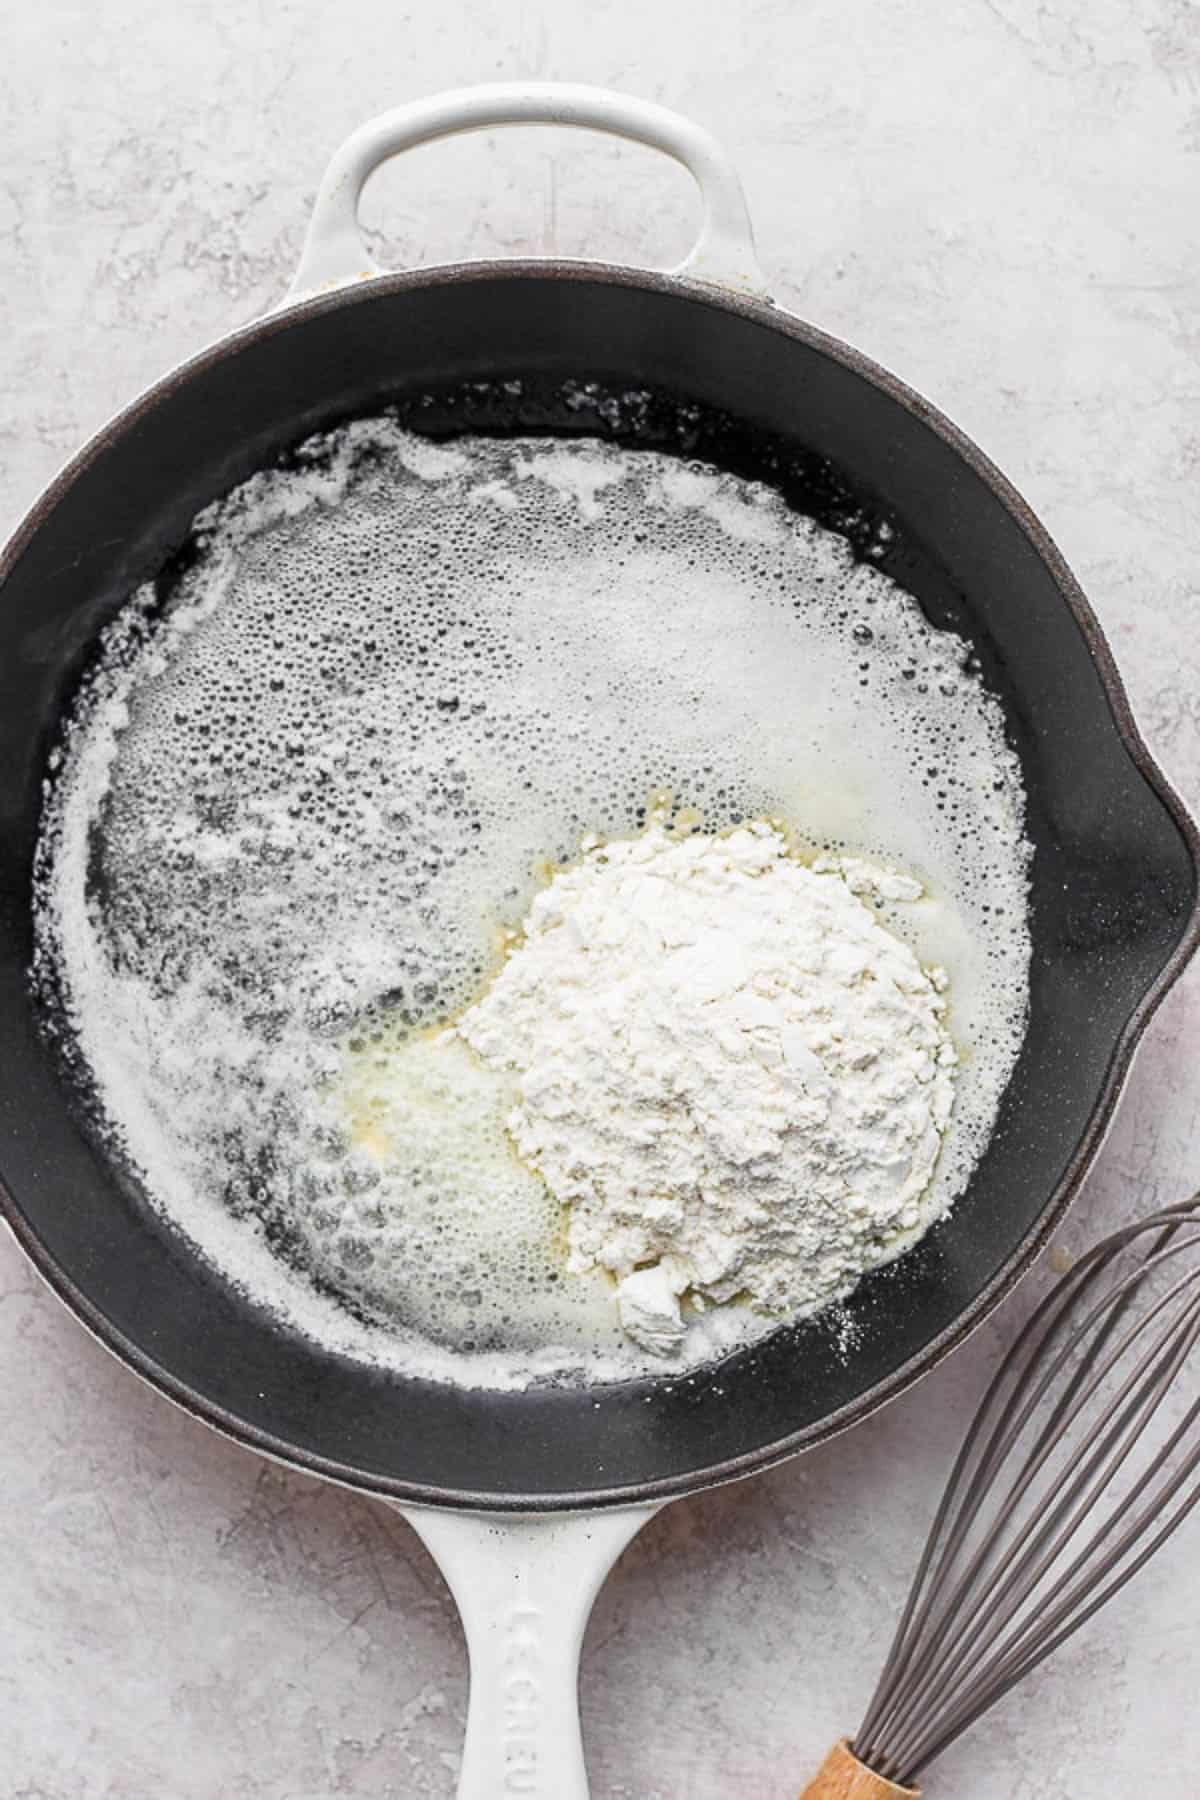 Flour added to melted butter in a skillet.